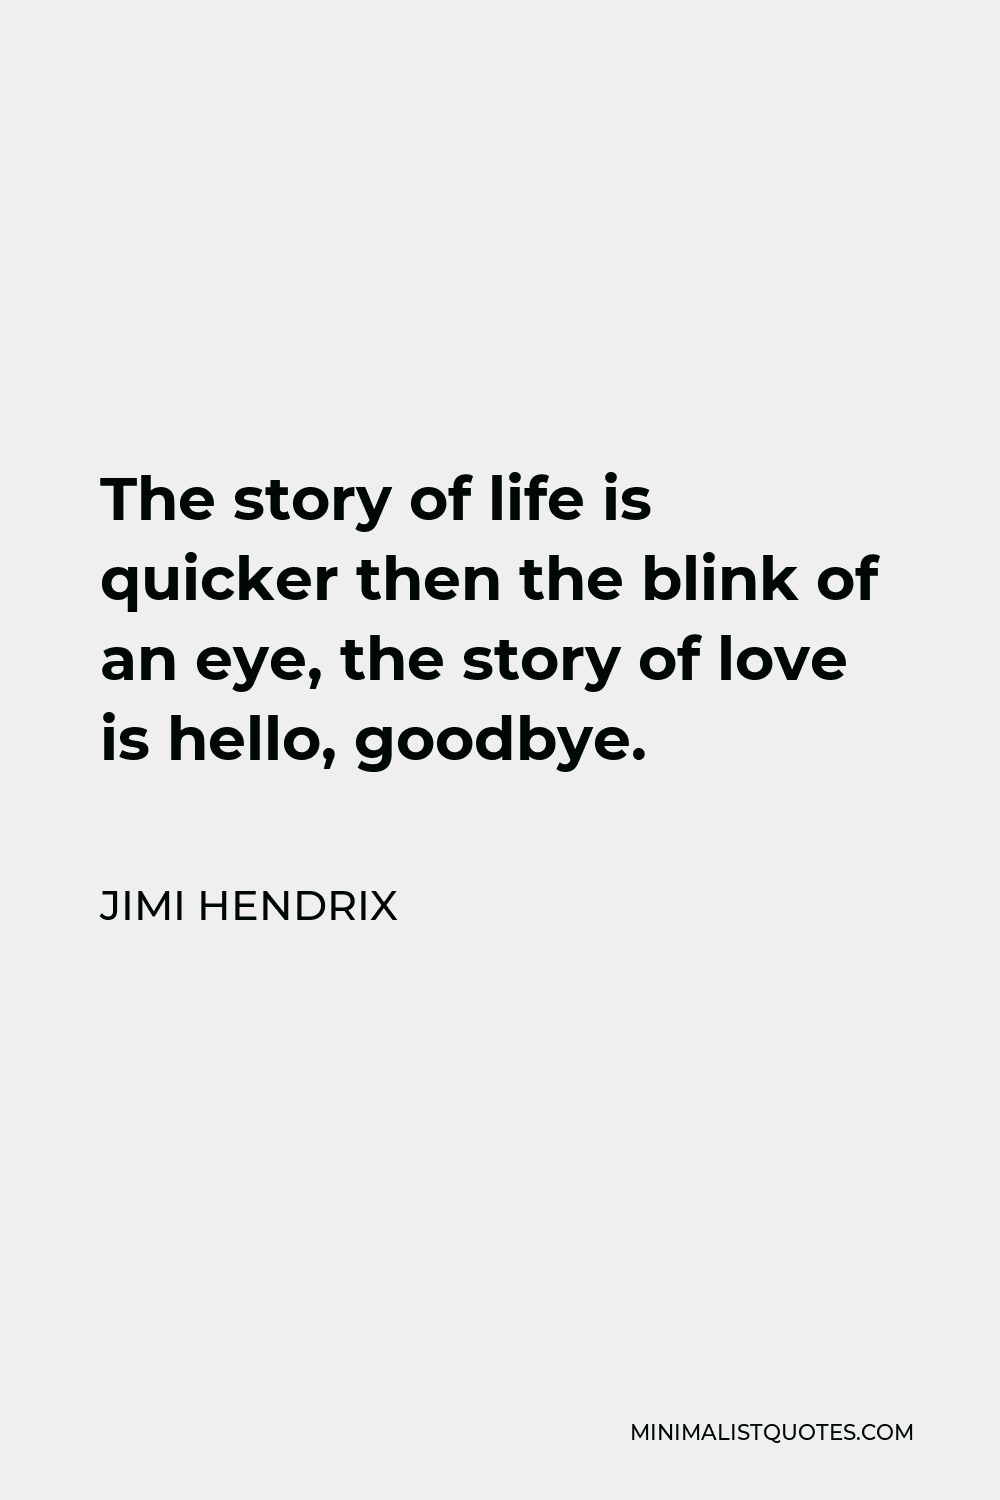 Jimi Hendrix Quote - The story of life is quicker then the blink of an eye, the story of love is hello, goodbye.